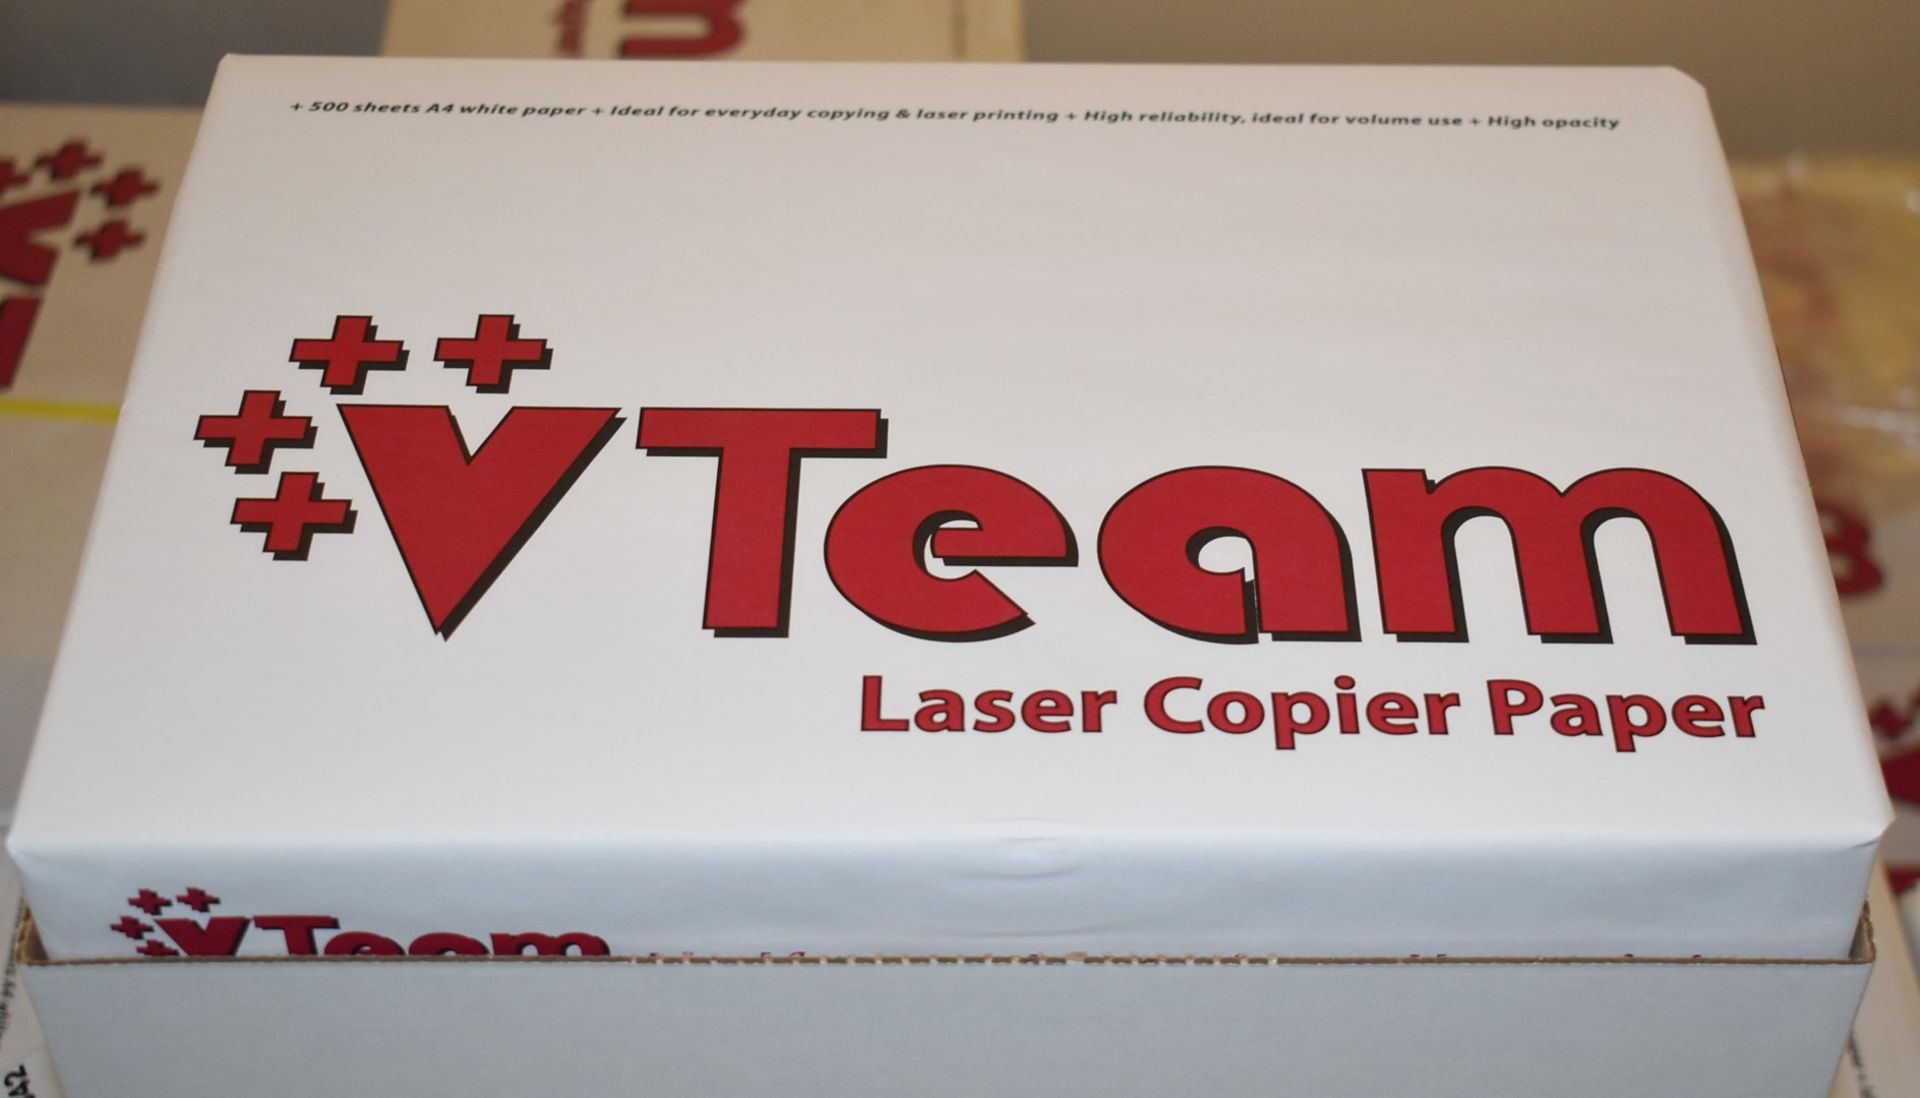 10 x Packs of Vteam A4 Laser Copy Paper - 500 Sheets Per Pack - Includes 2 x Boxes of 5 x Reams - Image 2 of 6